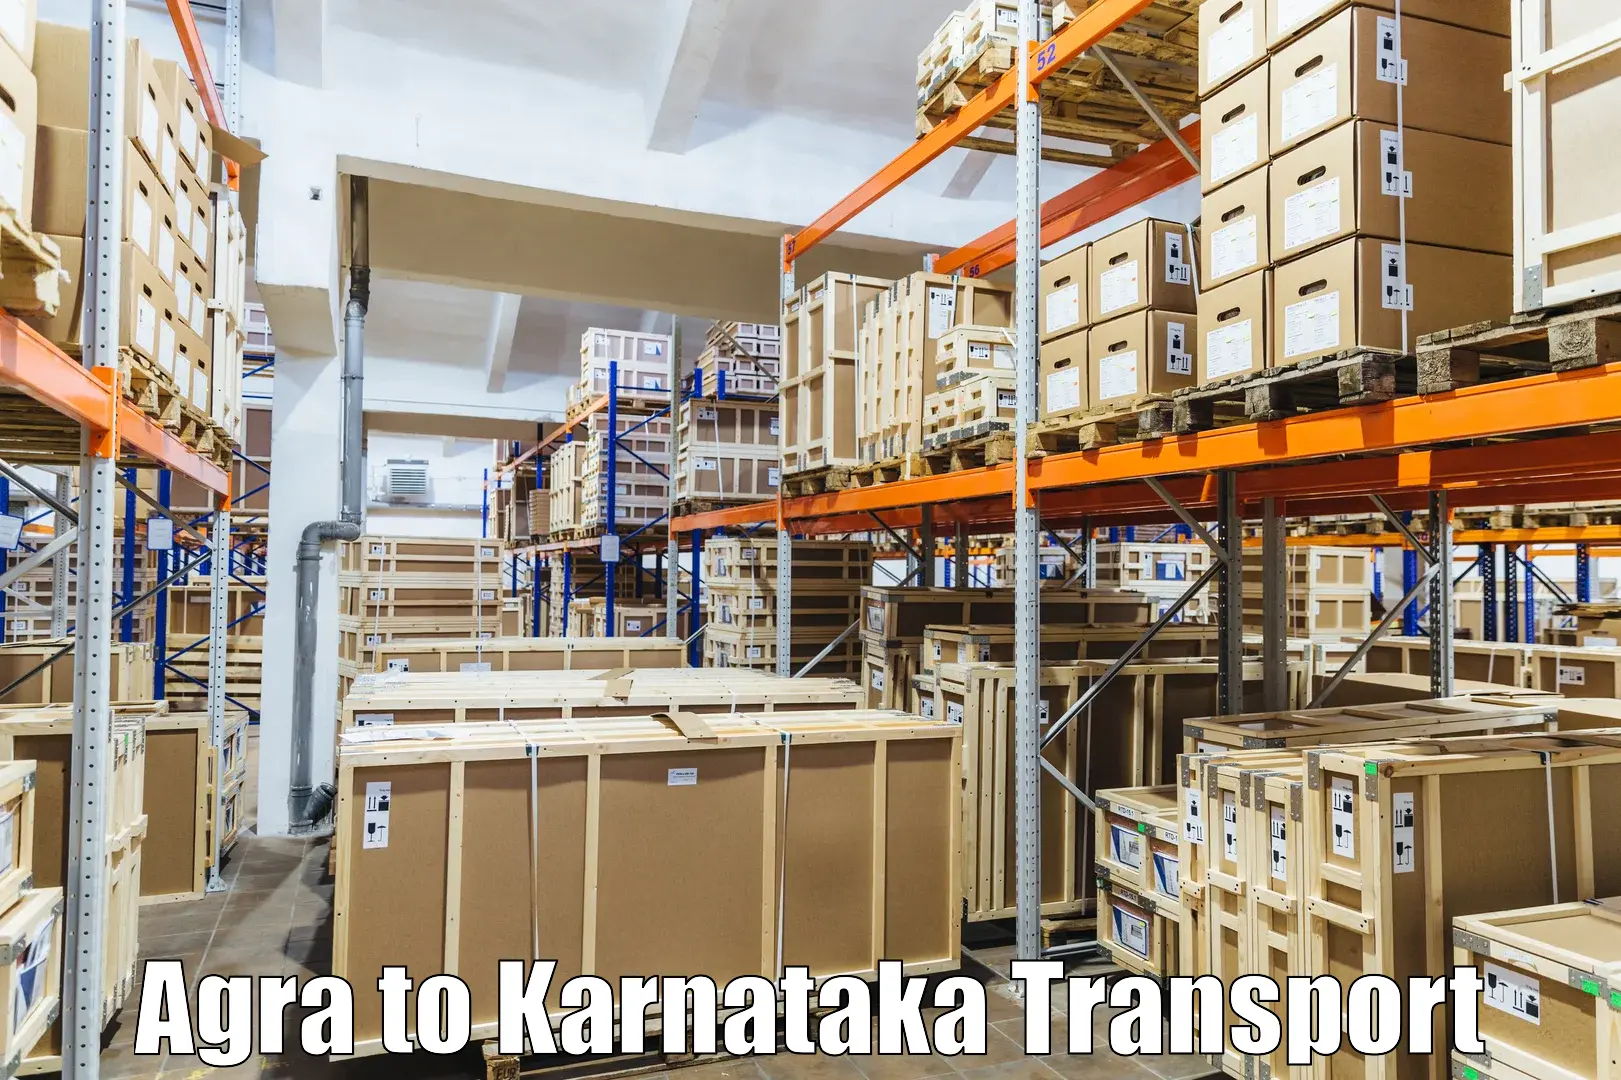 Goods delivery service Agra to Mangalore Port